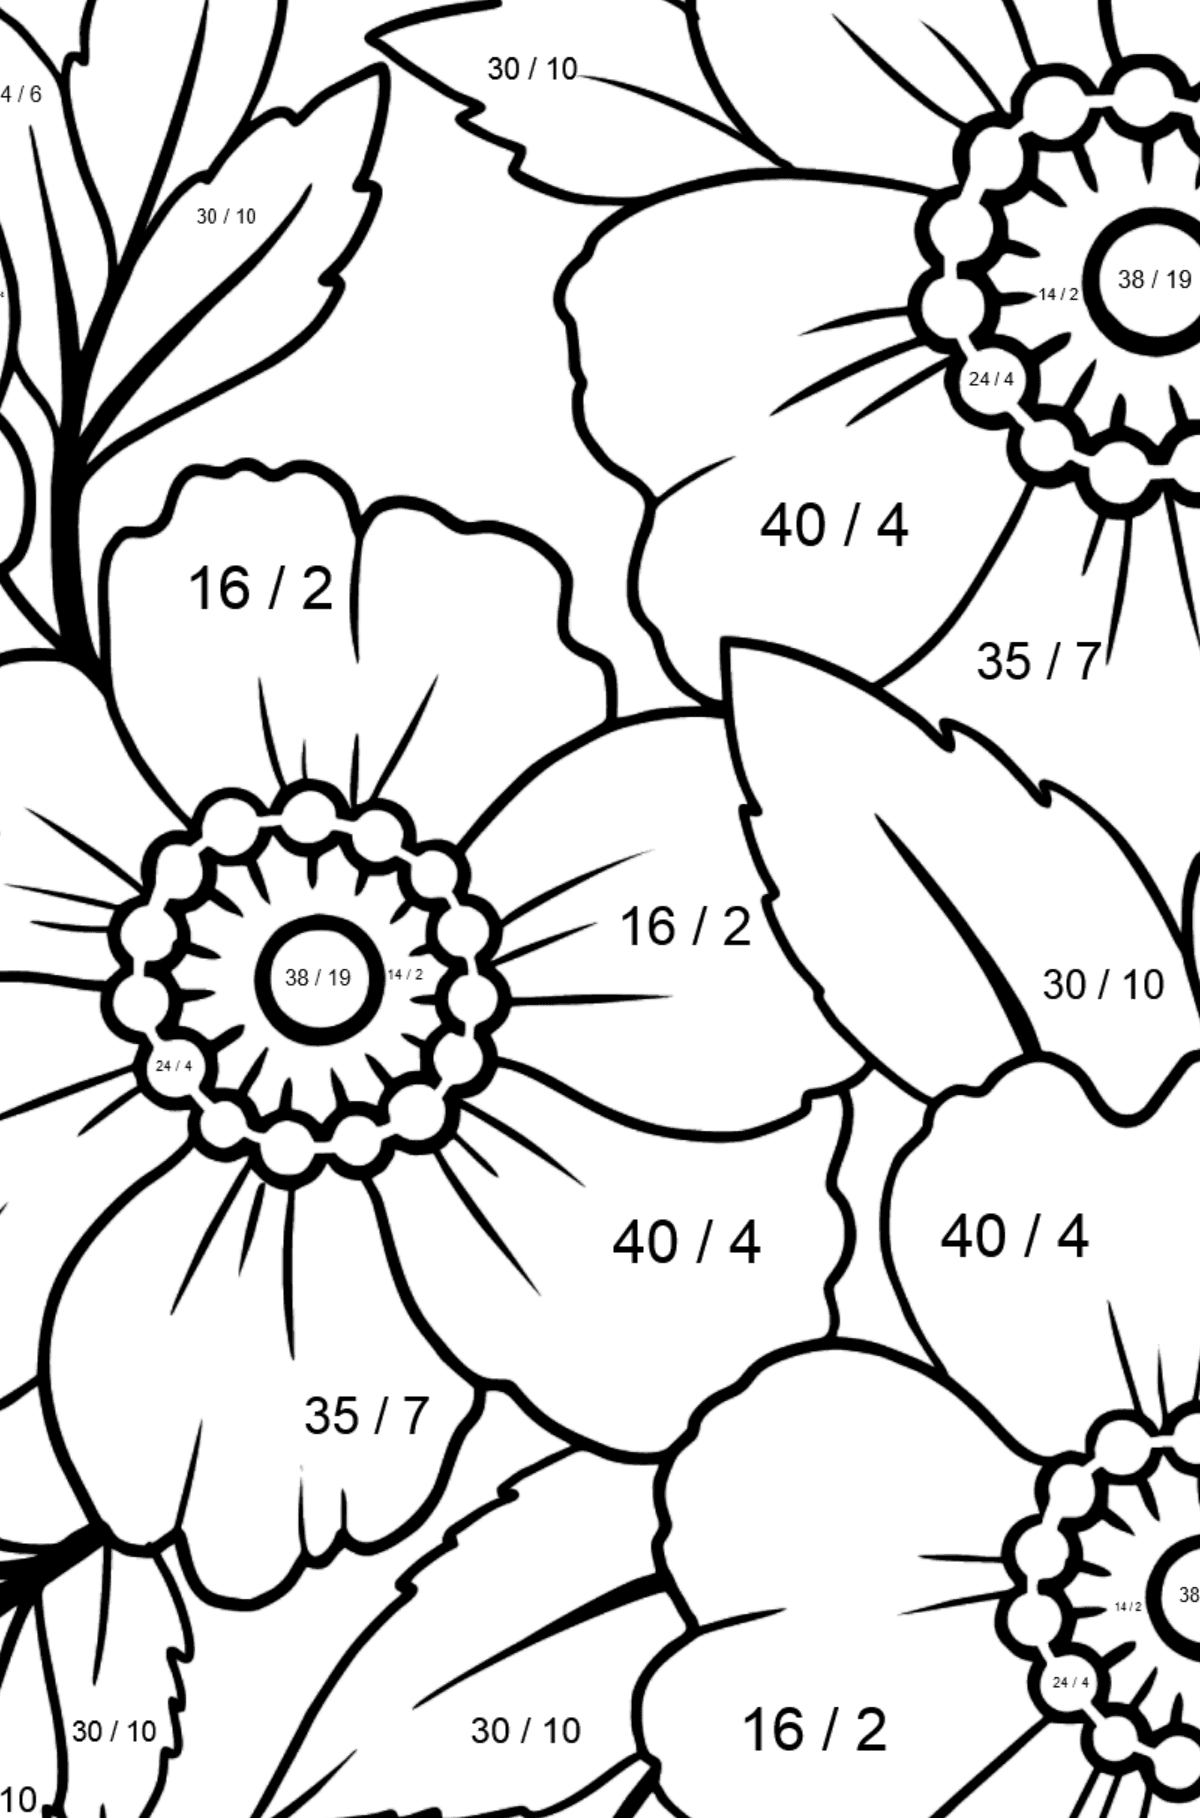 Flower Coloring Page (A4) - A Japanese Anemone with Pink Petals - Math Coloring - Division for Kids